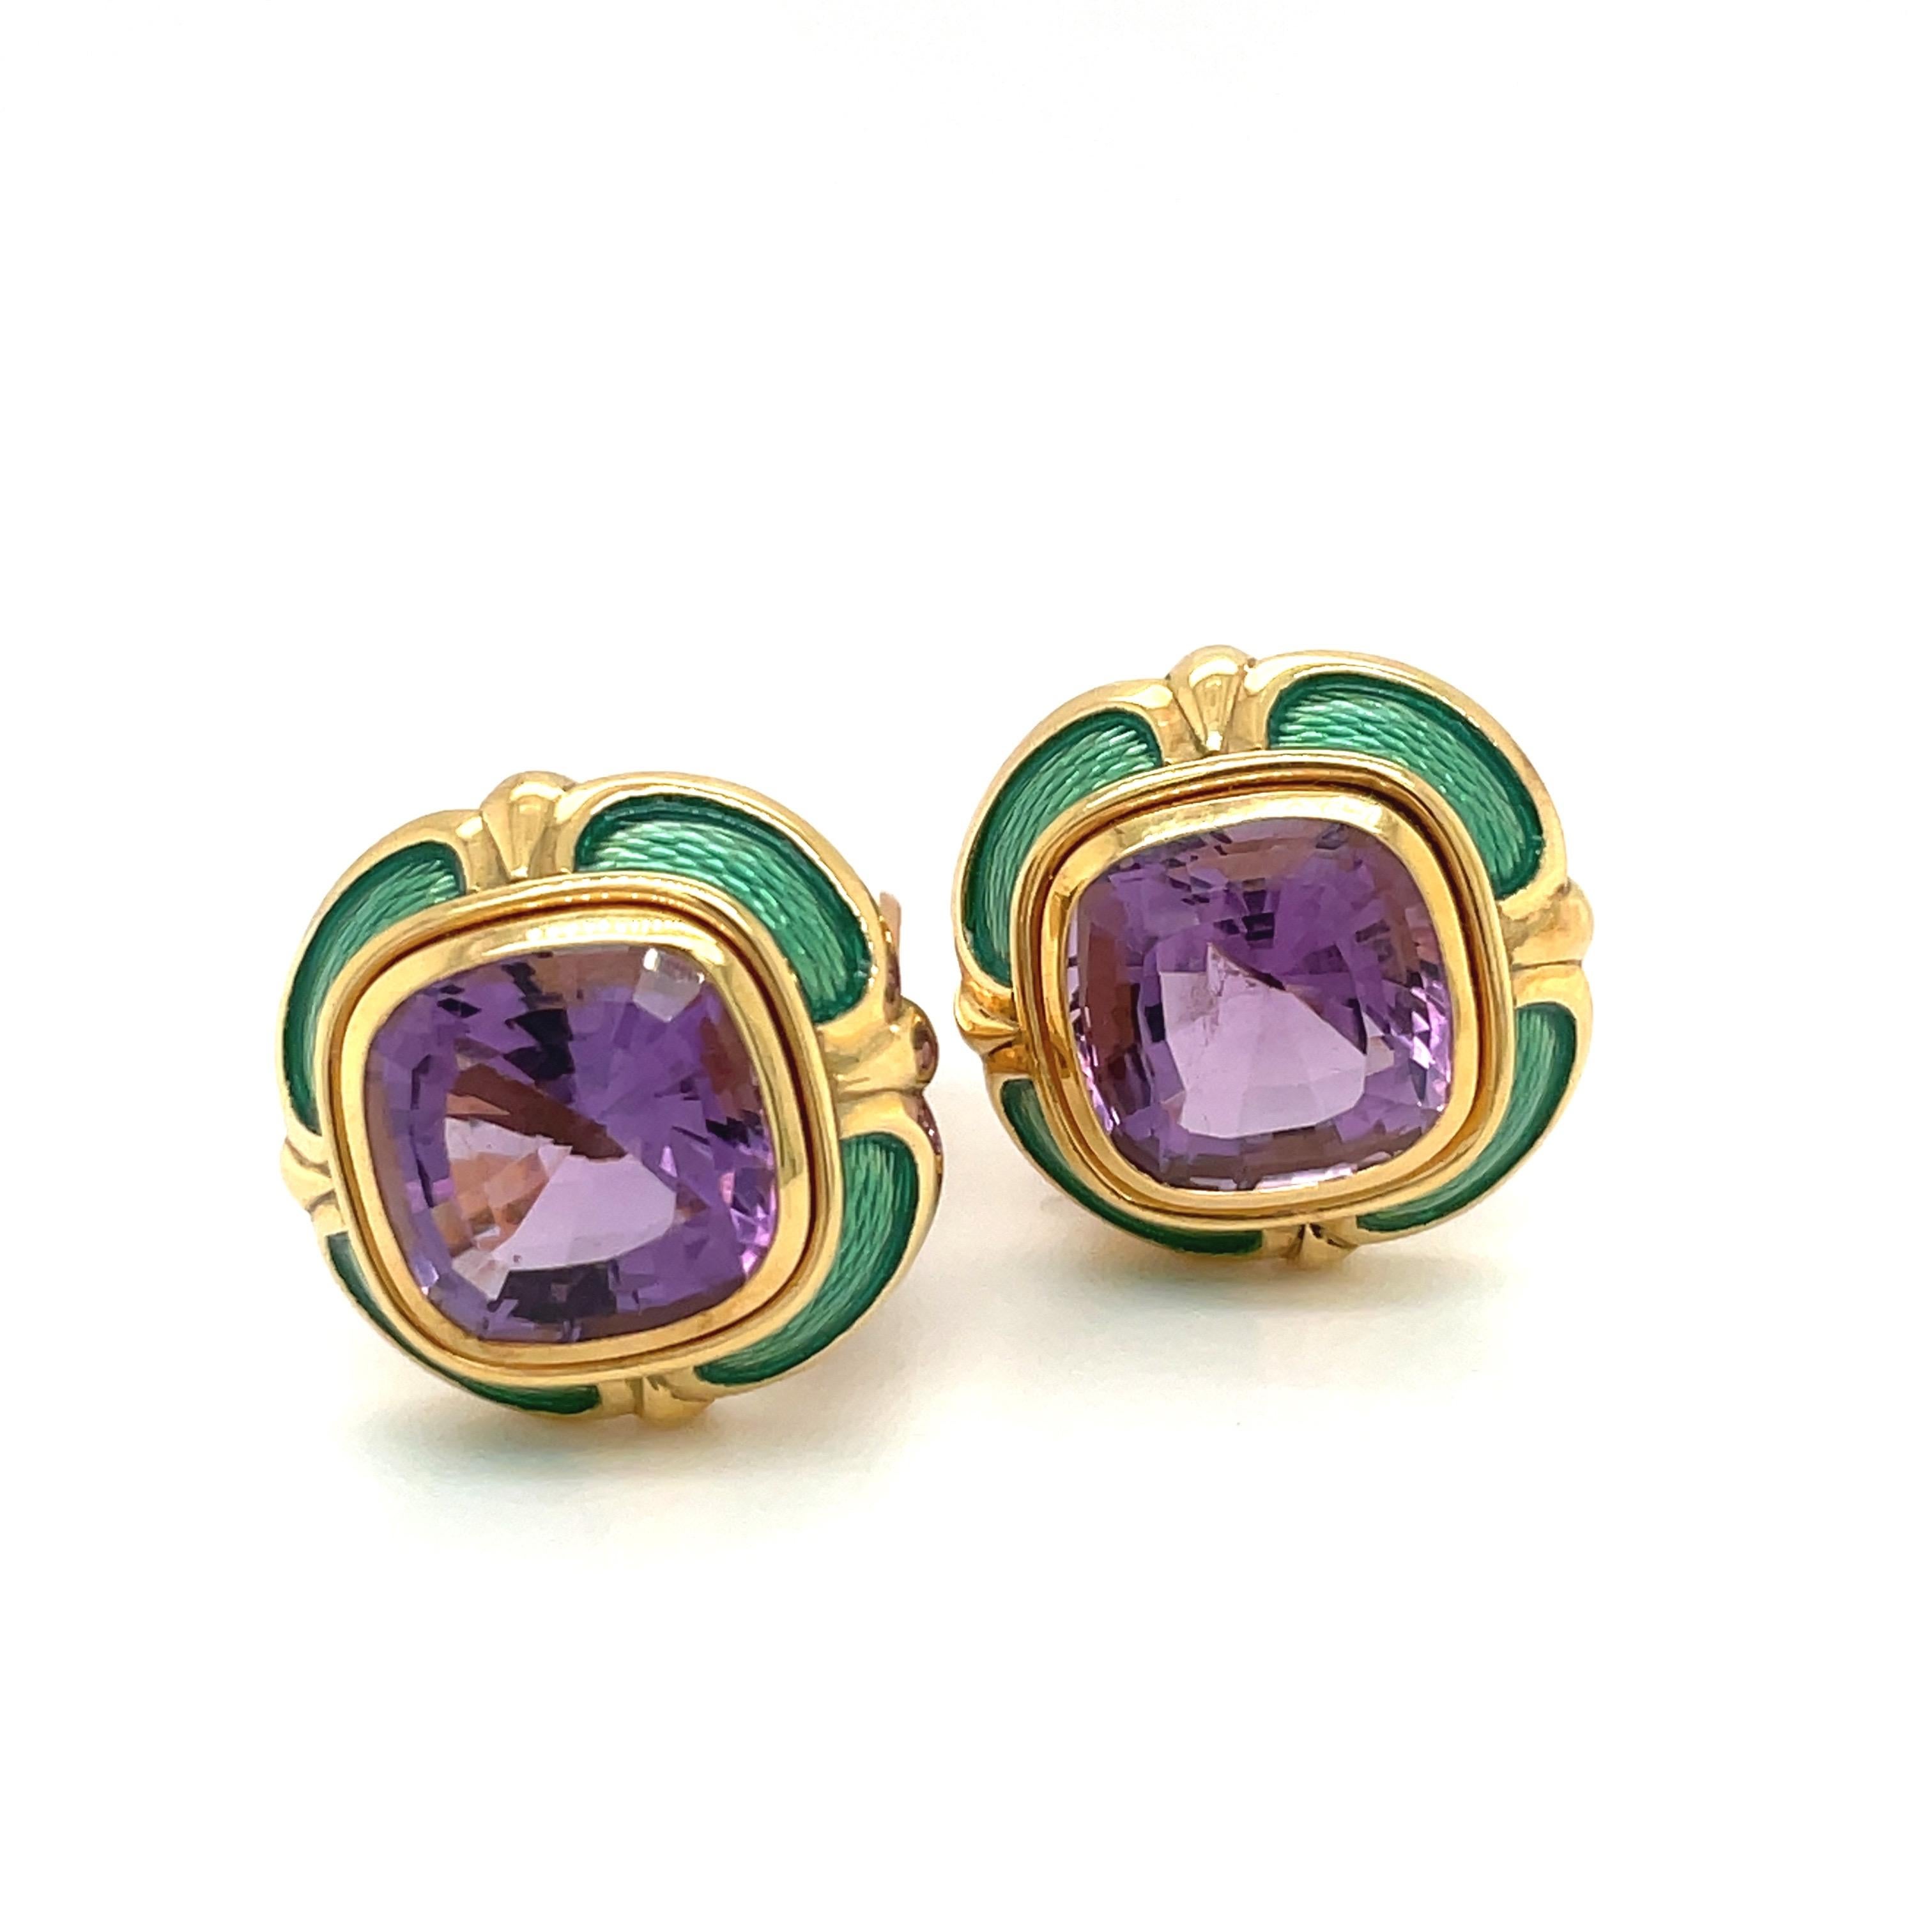 Cushion Cut Leo De Vrooman 18kt Yellow Gold Earrings with 17.67ct. of Amethysts For Sale